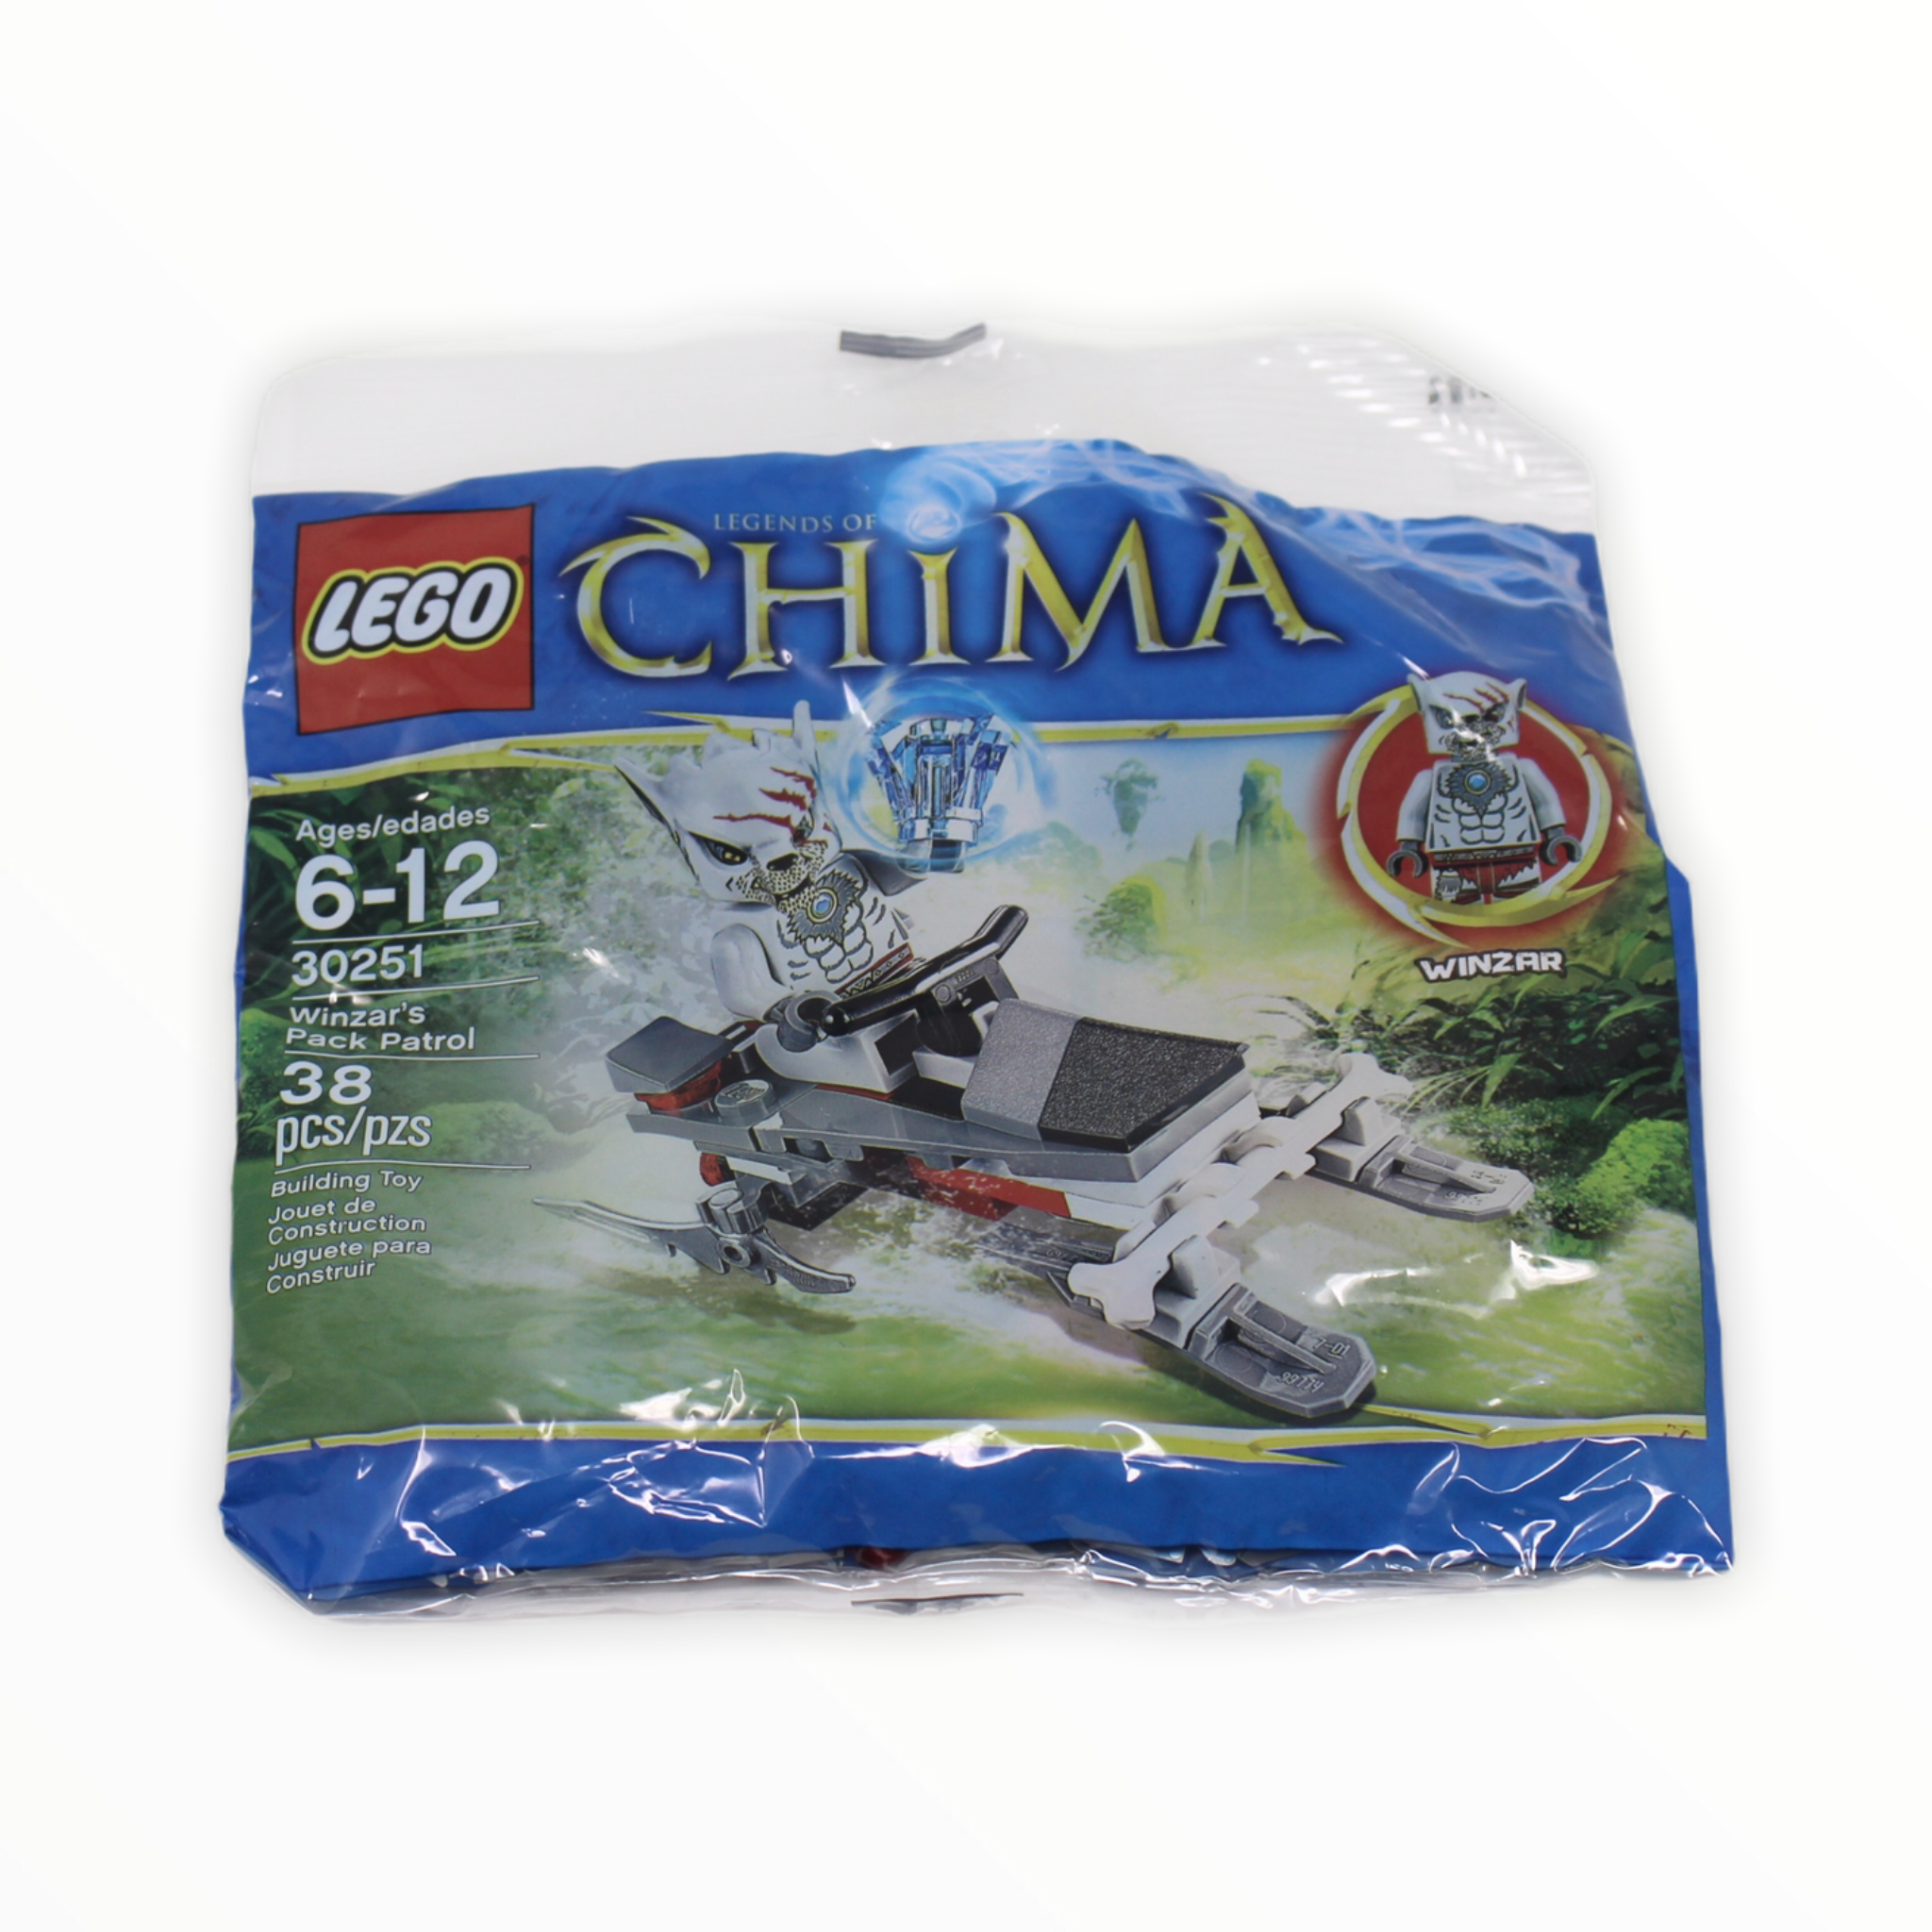 Polybag 30251 Legends of Chima Winzars Pack Patrol